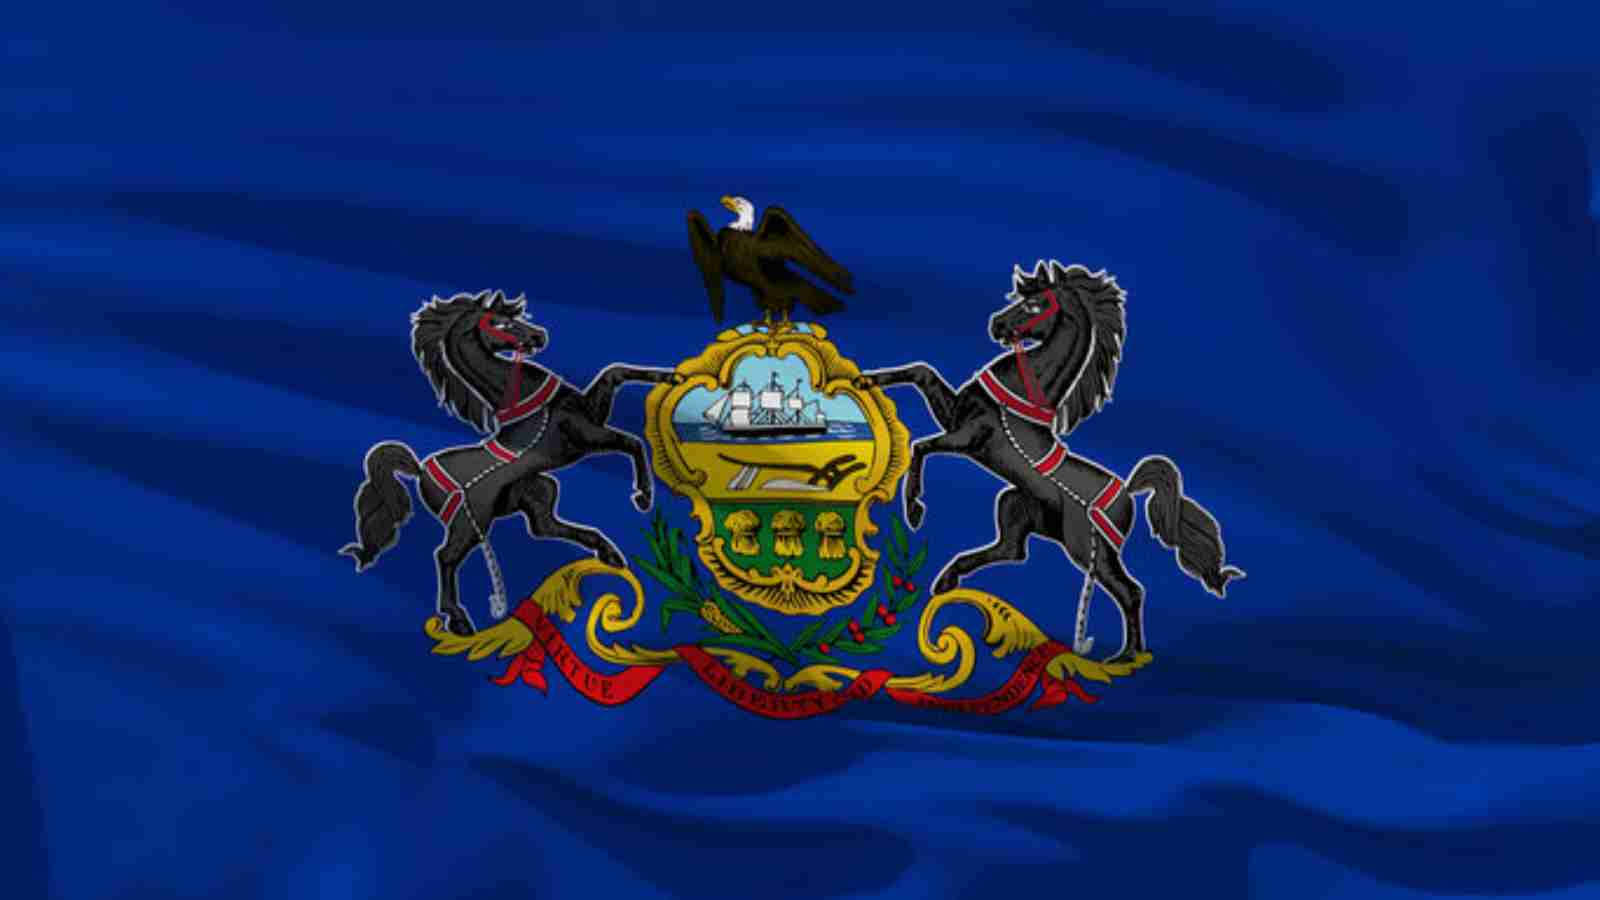 National Pennsylvania Day 2022 Date, History and Significance